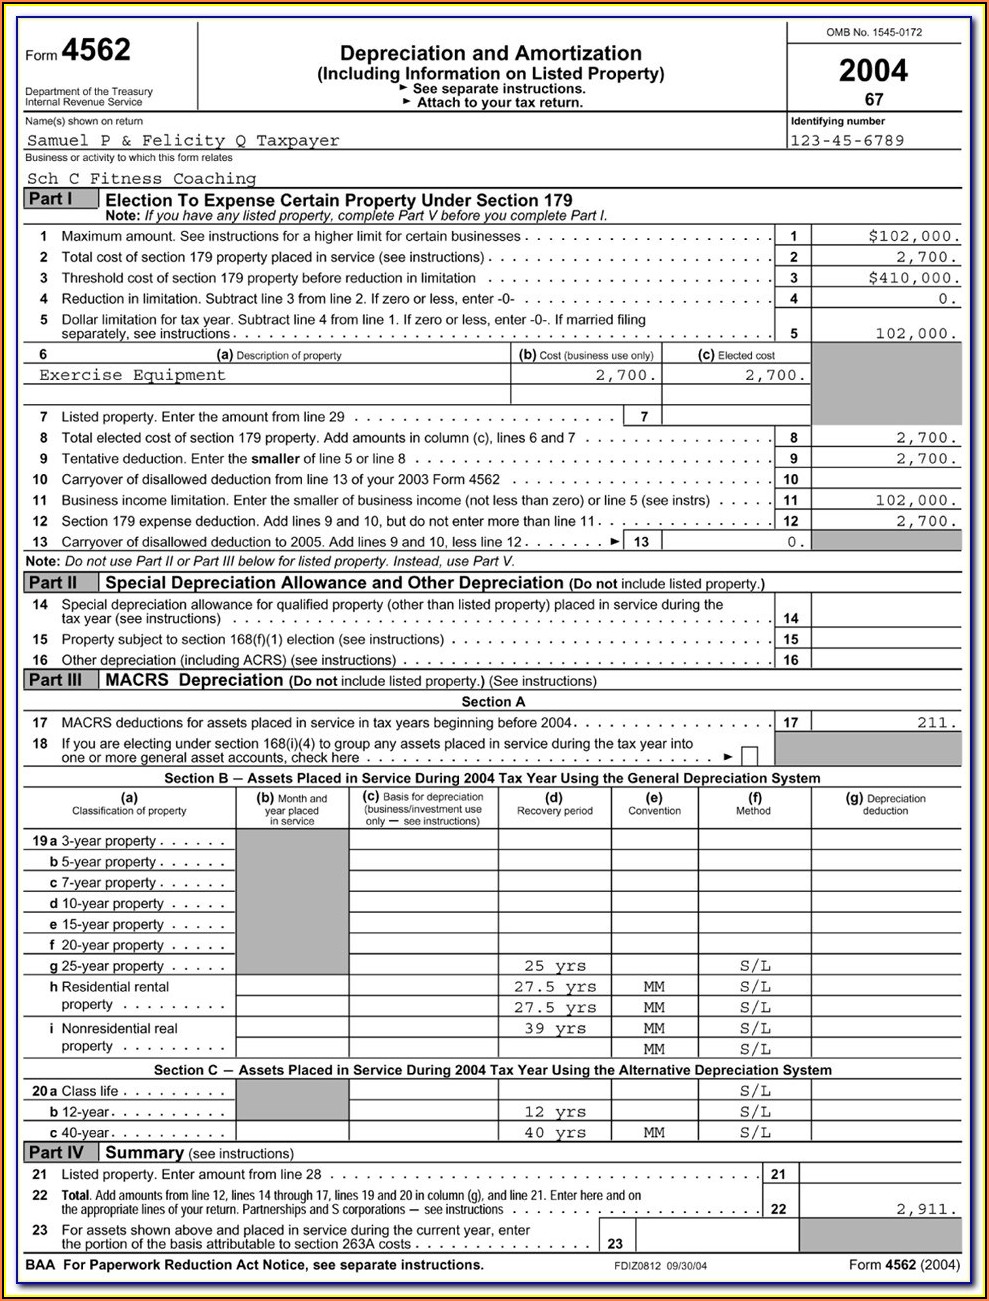 Irs 1099 Form 2014 Instructions